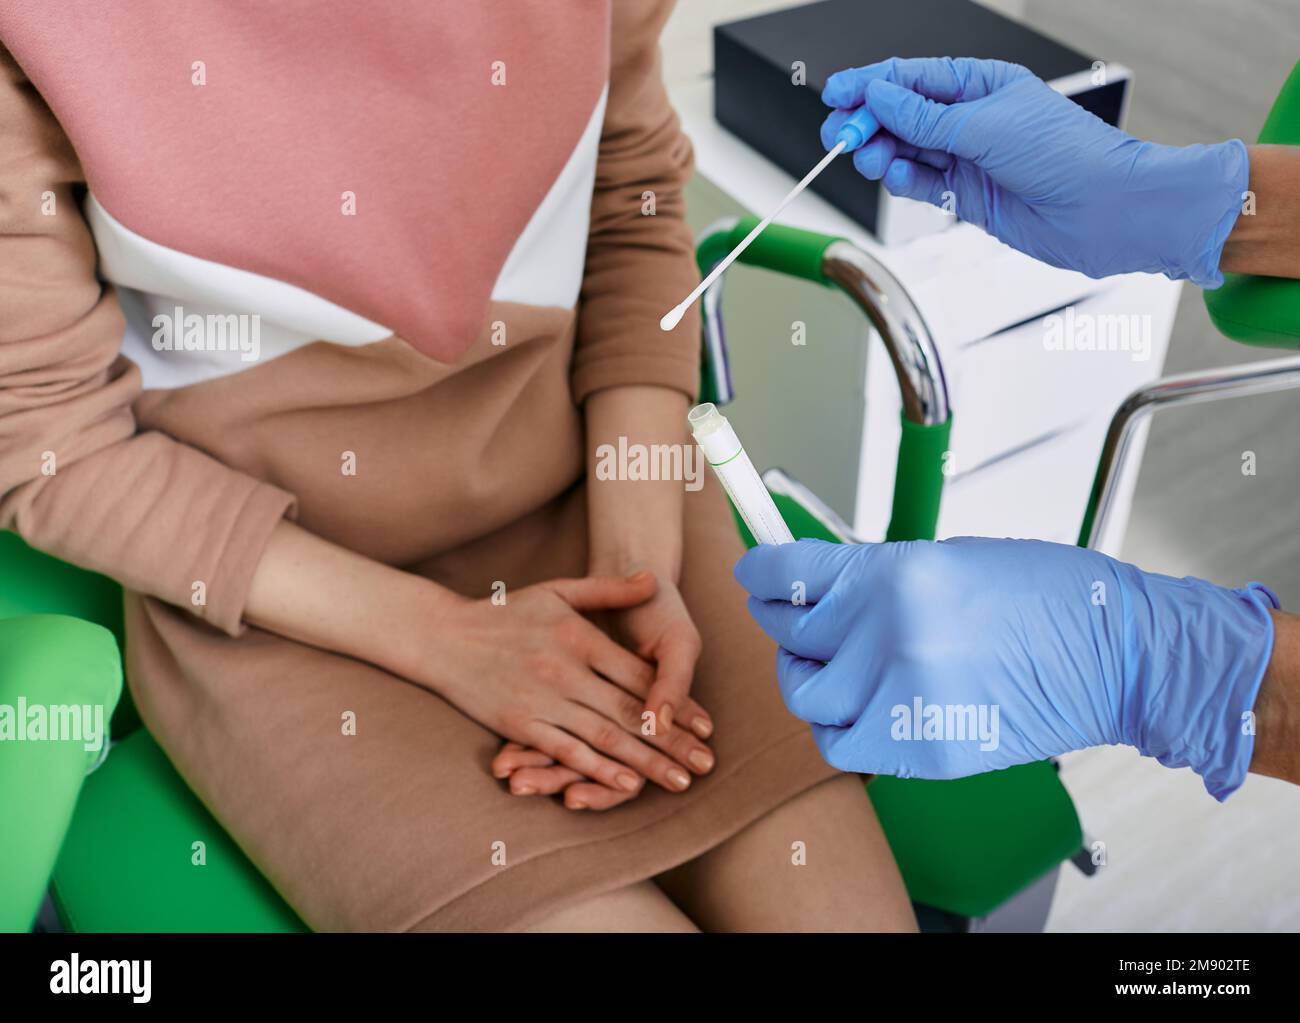 Analysis of urogenital smear for microflora. Gynecologist doctor taking smear for flora from female patient in gynecological office, close-up Stock Photo